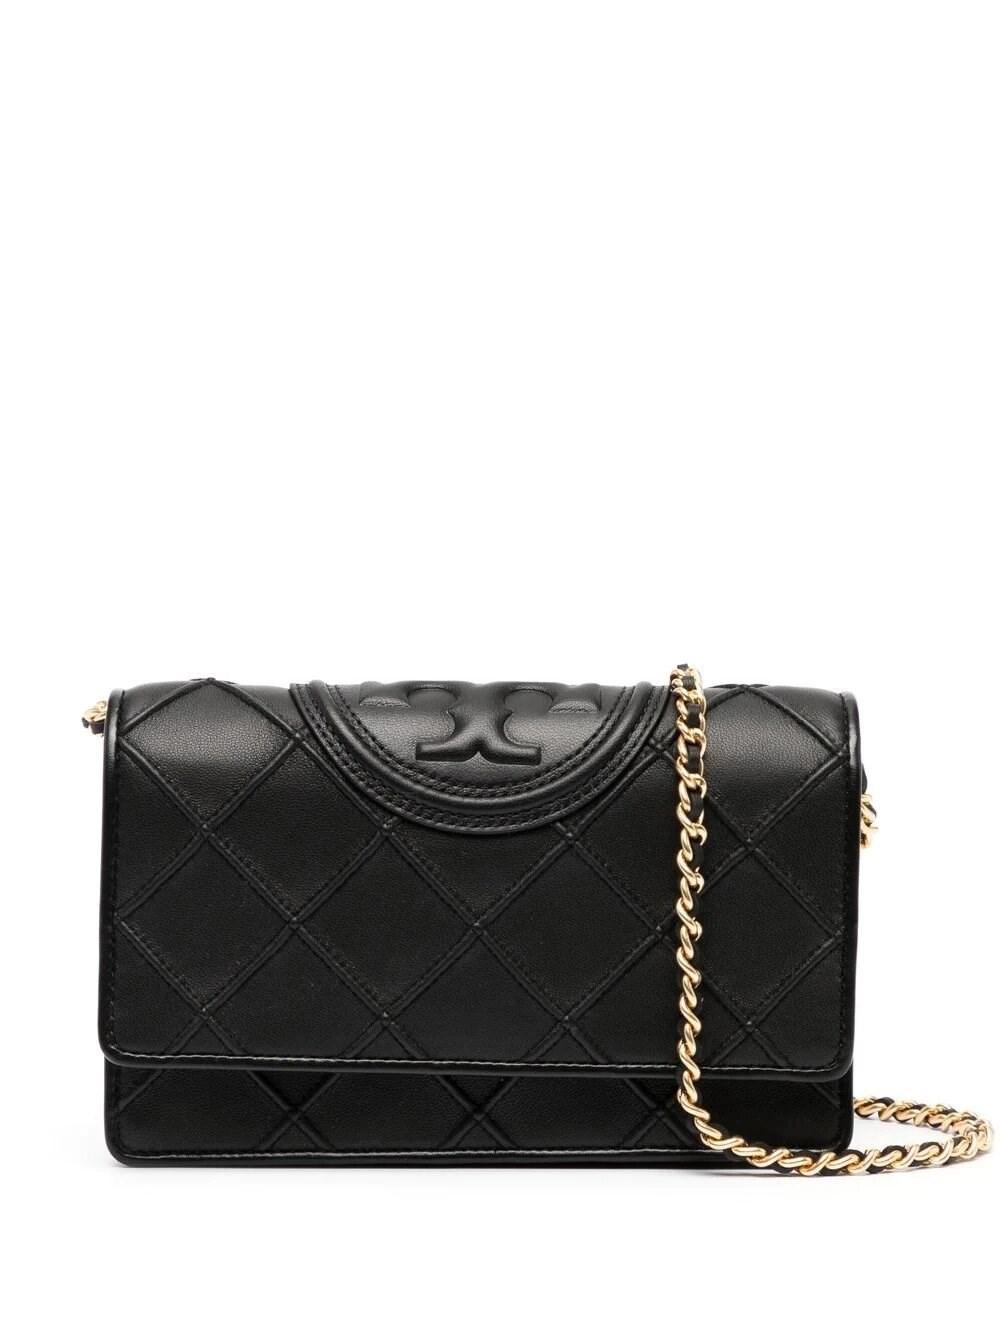 Tory Burch Fleming Soft Chain Wallet in Black | Lyst